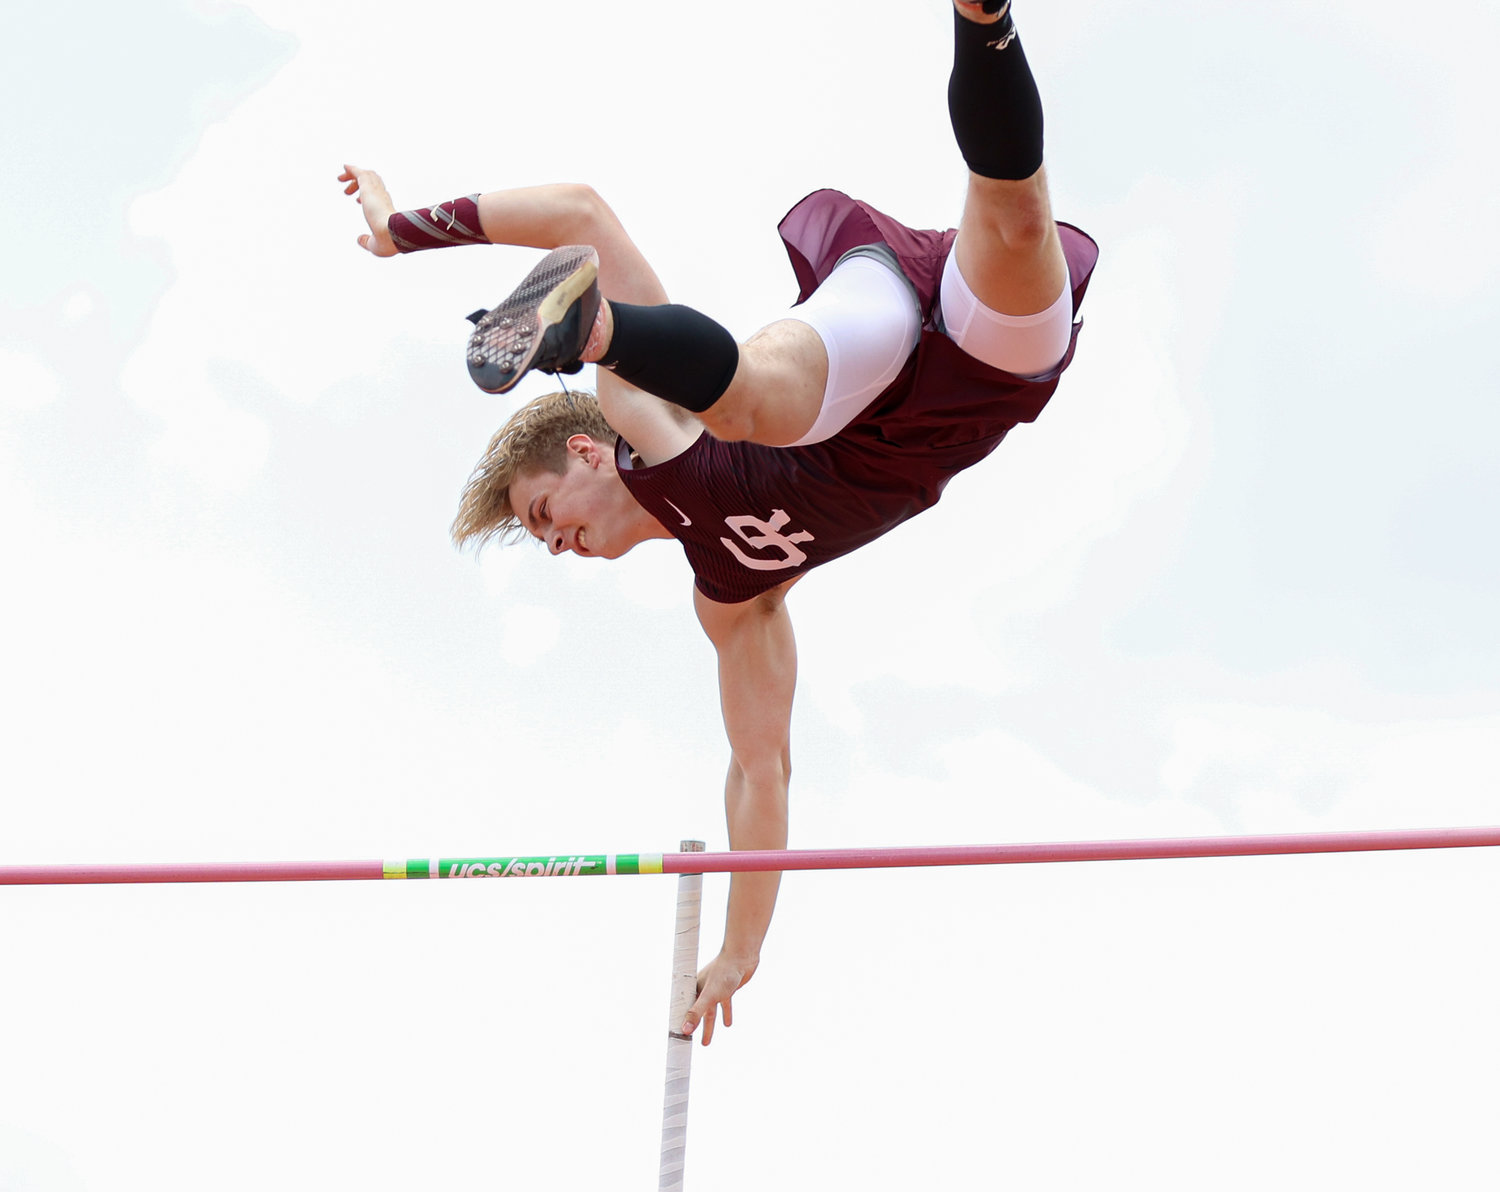 William Saxman of Cinco Ranch High School competes in the Class 6A boys pole vault event at the UIL State Track and Field Meet on May 8, 2021 at Mike A. Myers Stadium in Austin, Texas. Saxman finished fourth in the event with a vault of 15-6.00.